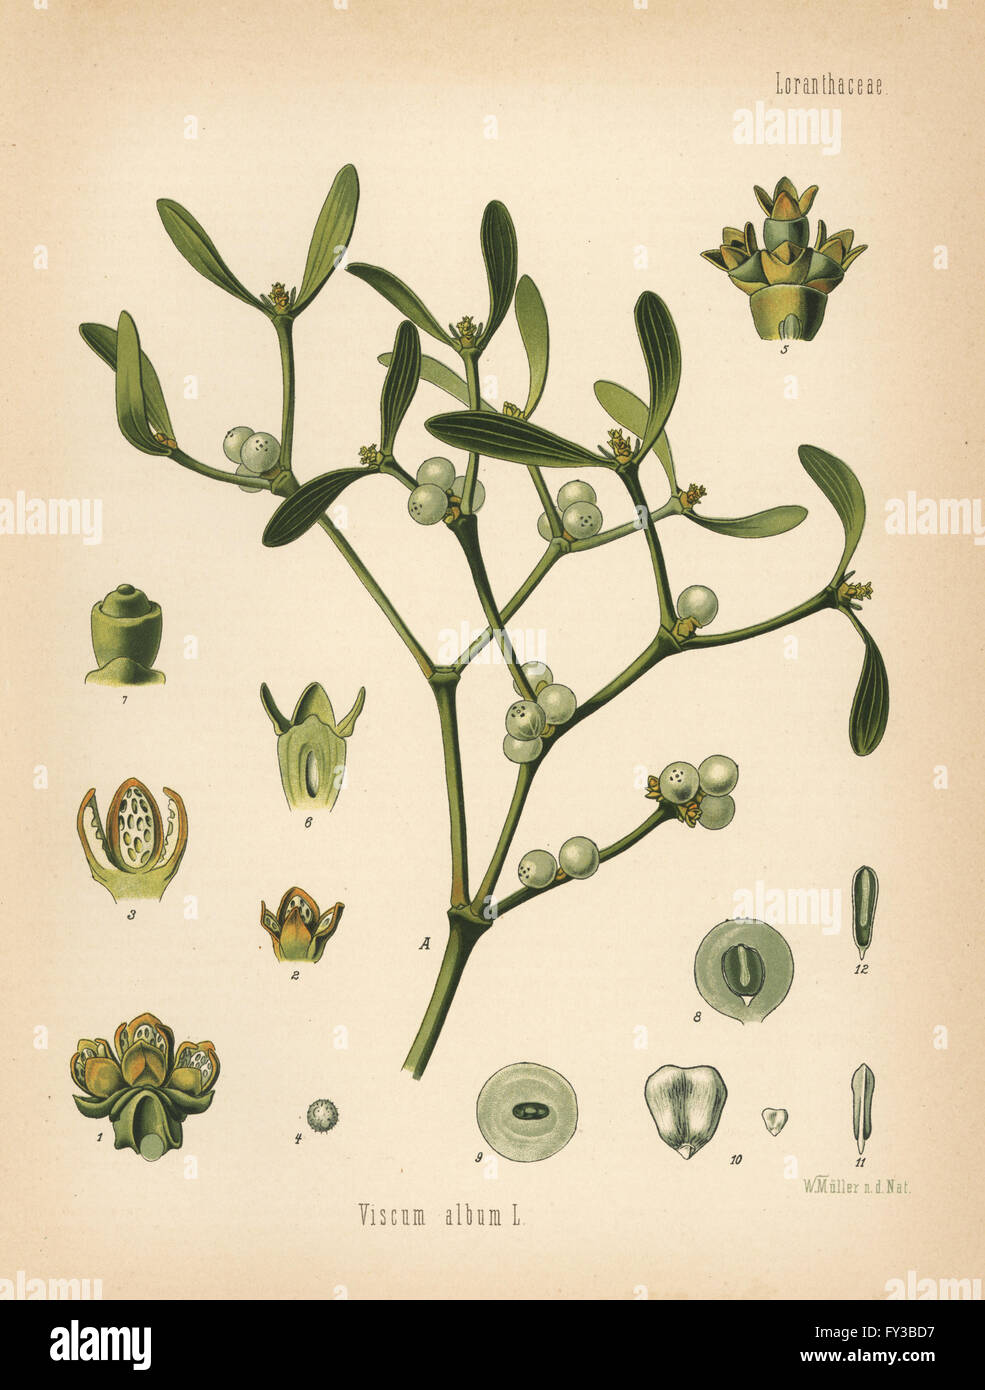 Mistletoe, Viscum album. Chromolithograph after a botanical illustration by Walther Muller from Hermann Adolph Koehler's Medicinal Plants, edited by Gustav Pabst, Koehler, Germany, 1887. Stock Photo